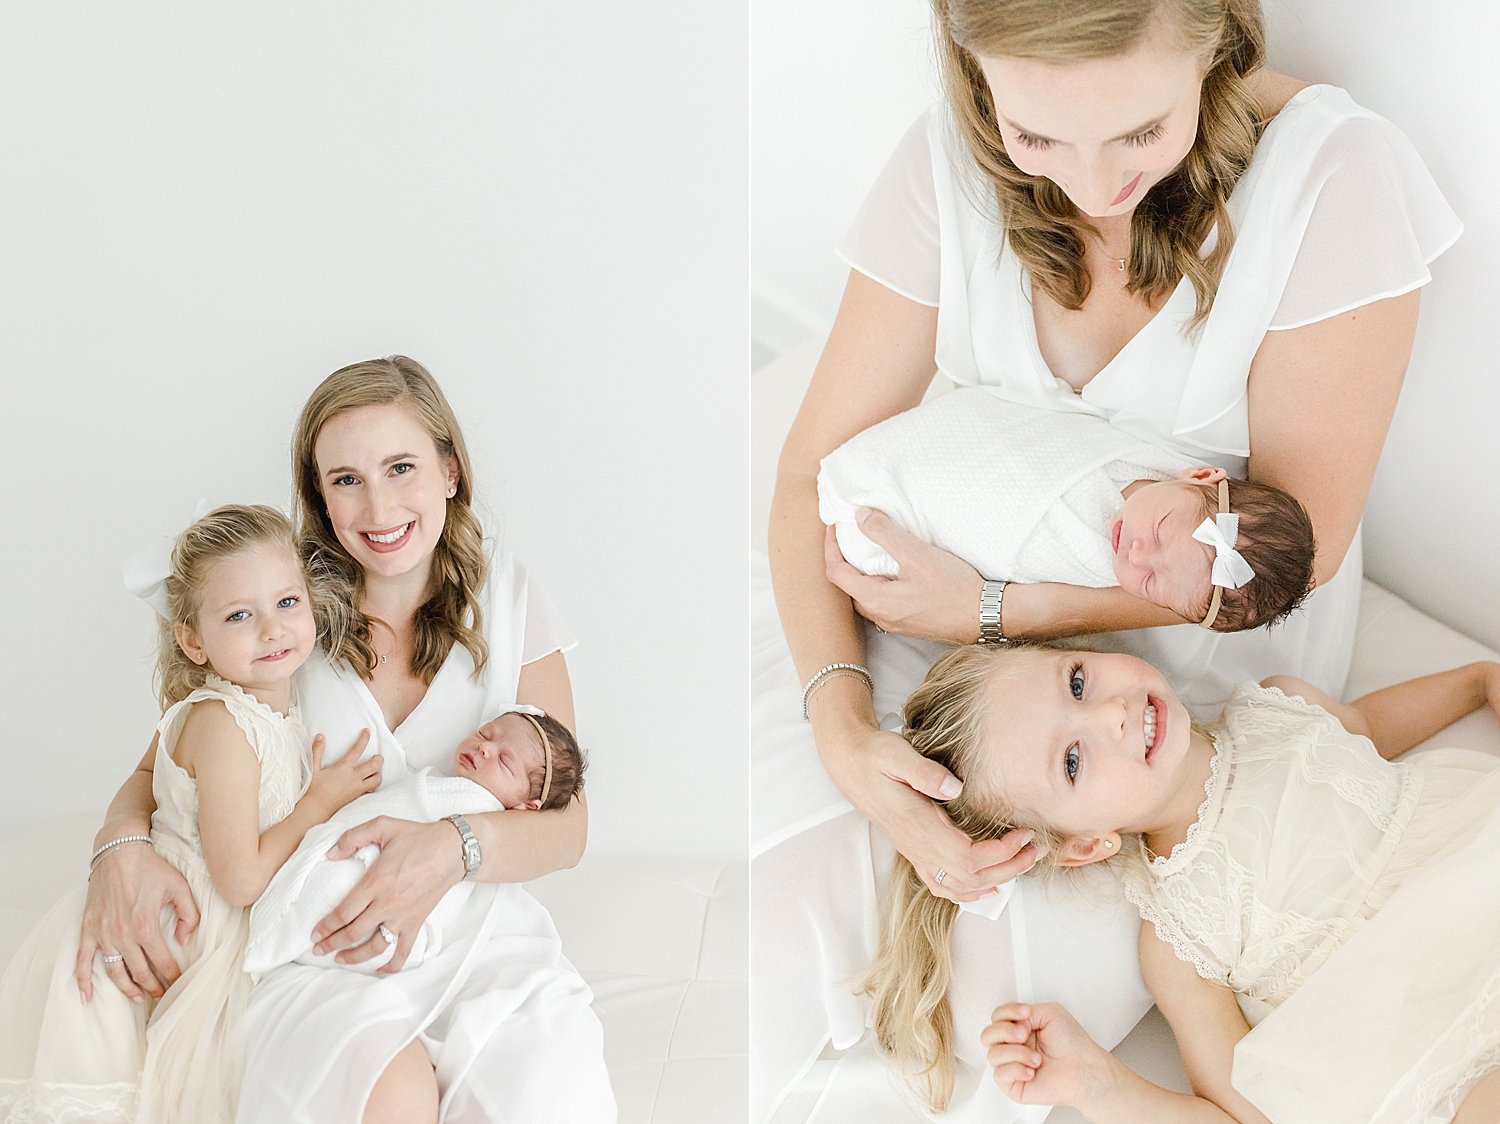 Mom with her two girls | Kristin Wood Photography